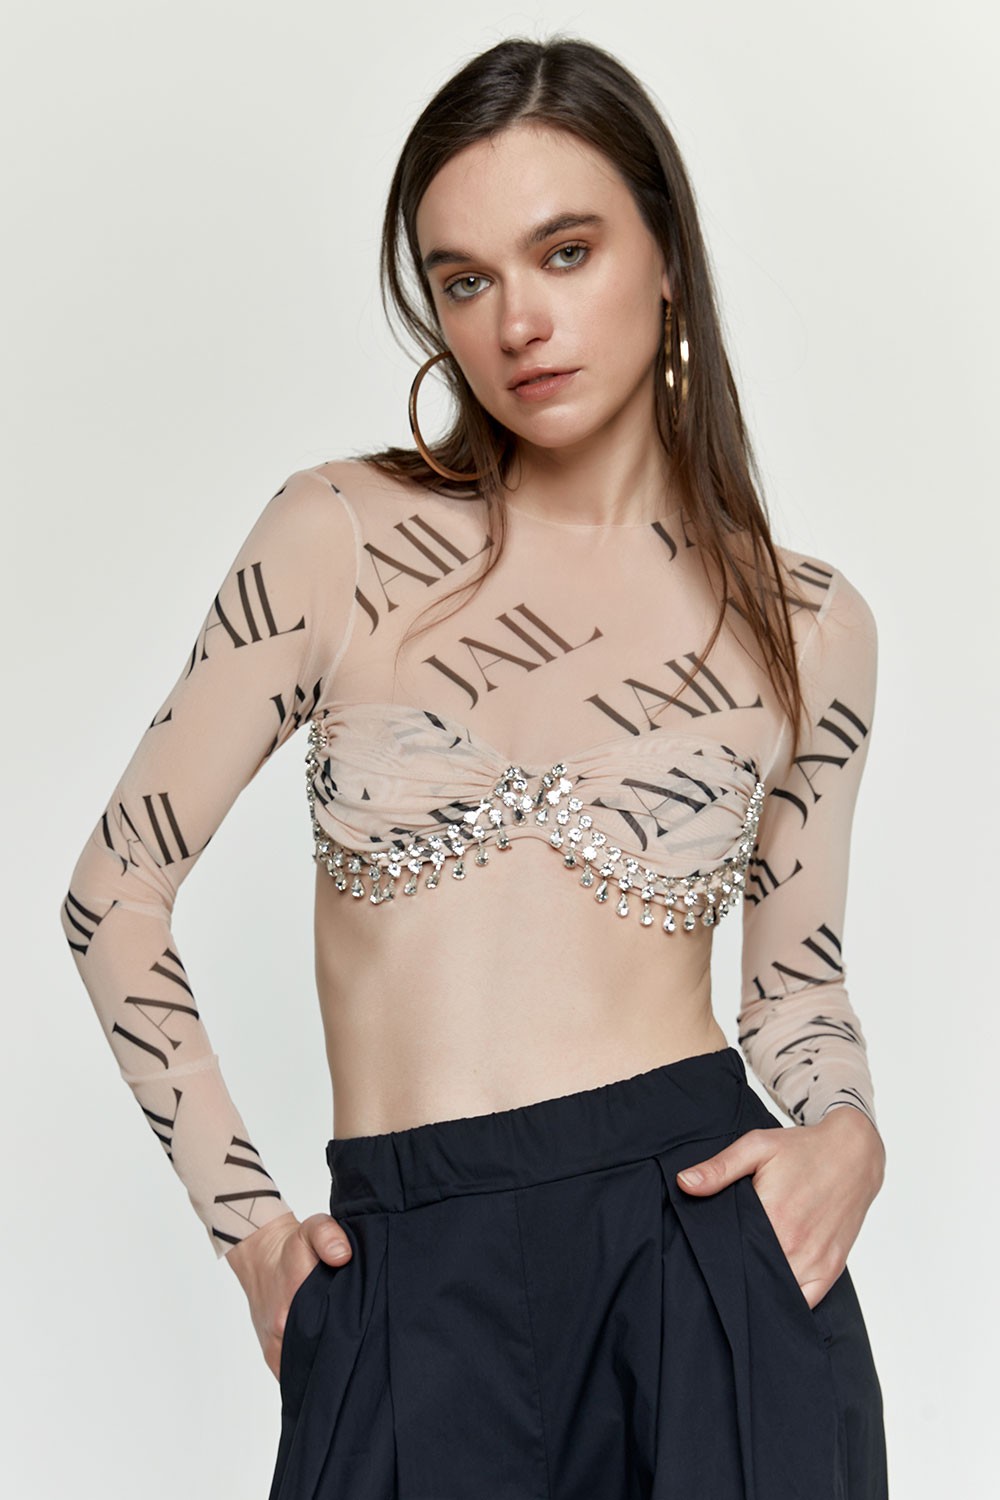 MILKWHITE mesh top with crystals